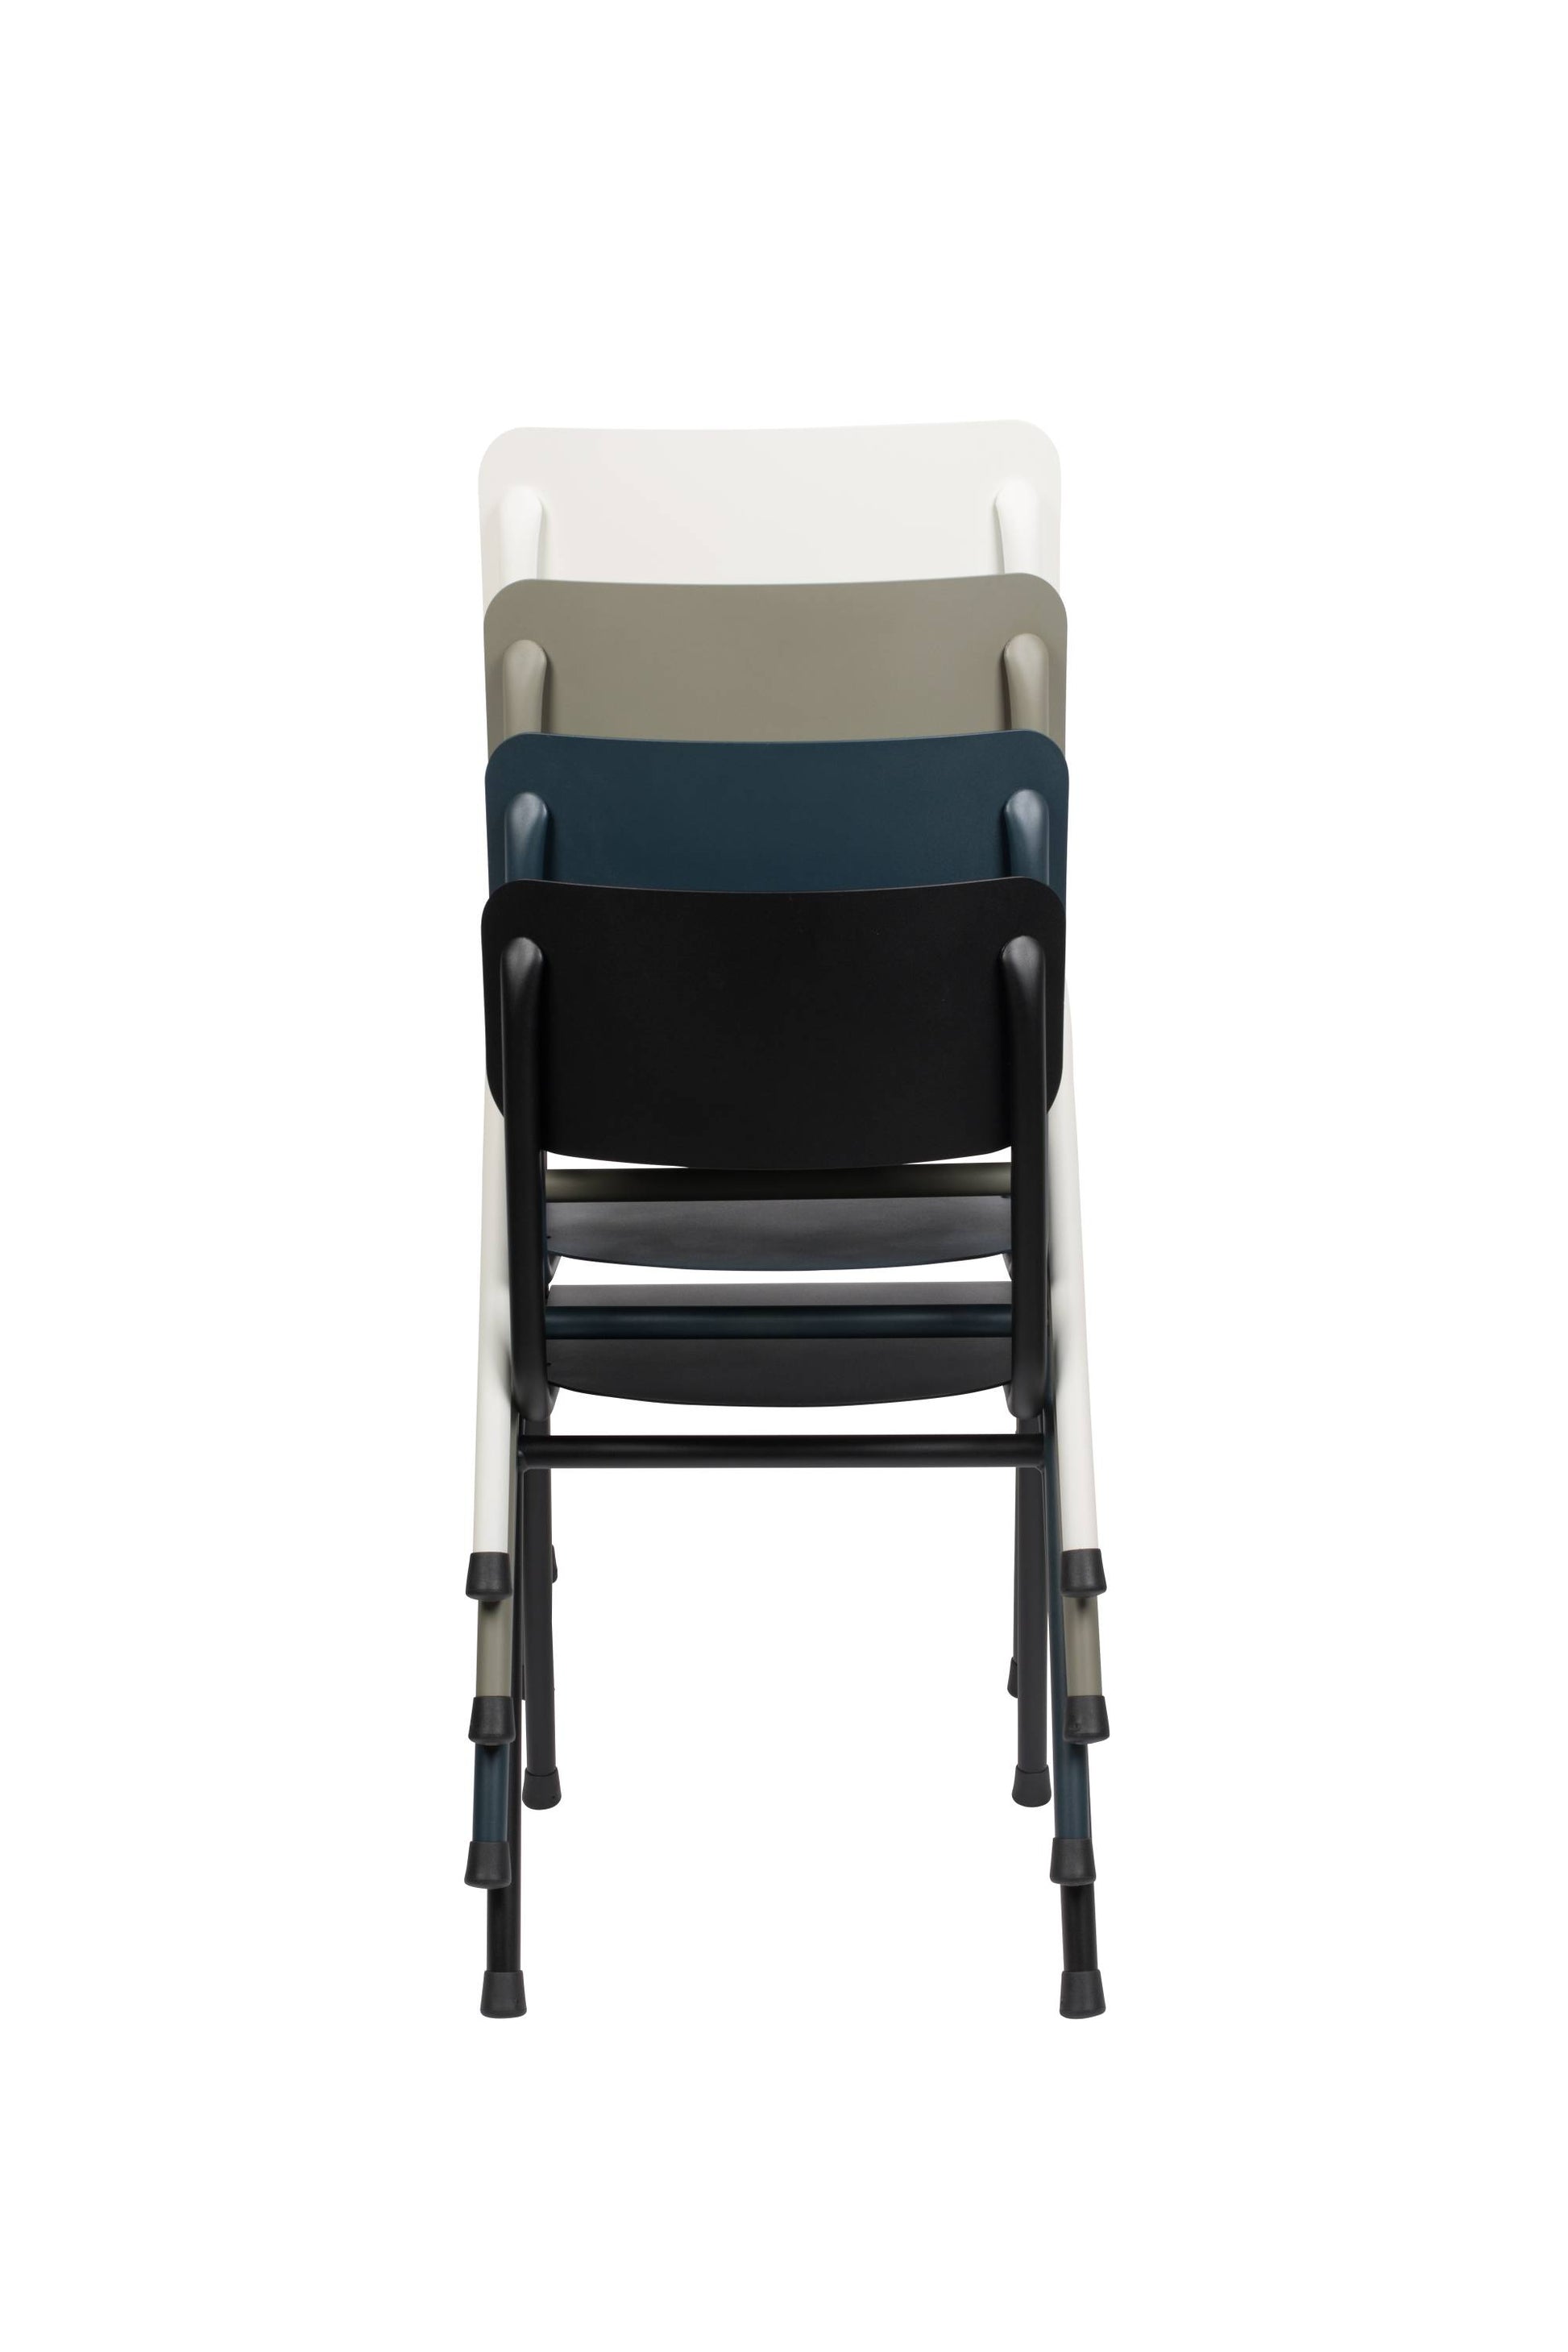 Zuiver | CHAIR BACK TO SCHOOL OUTDOOR WHITE Default Title